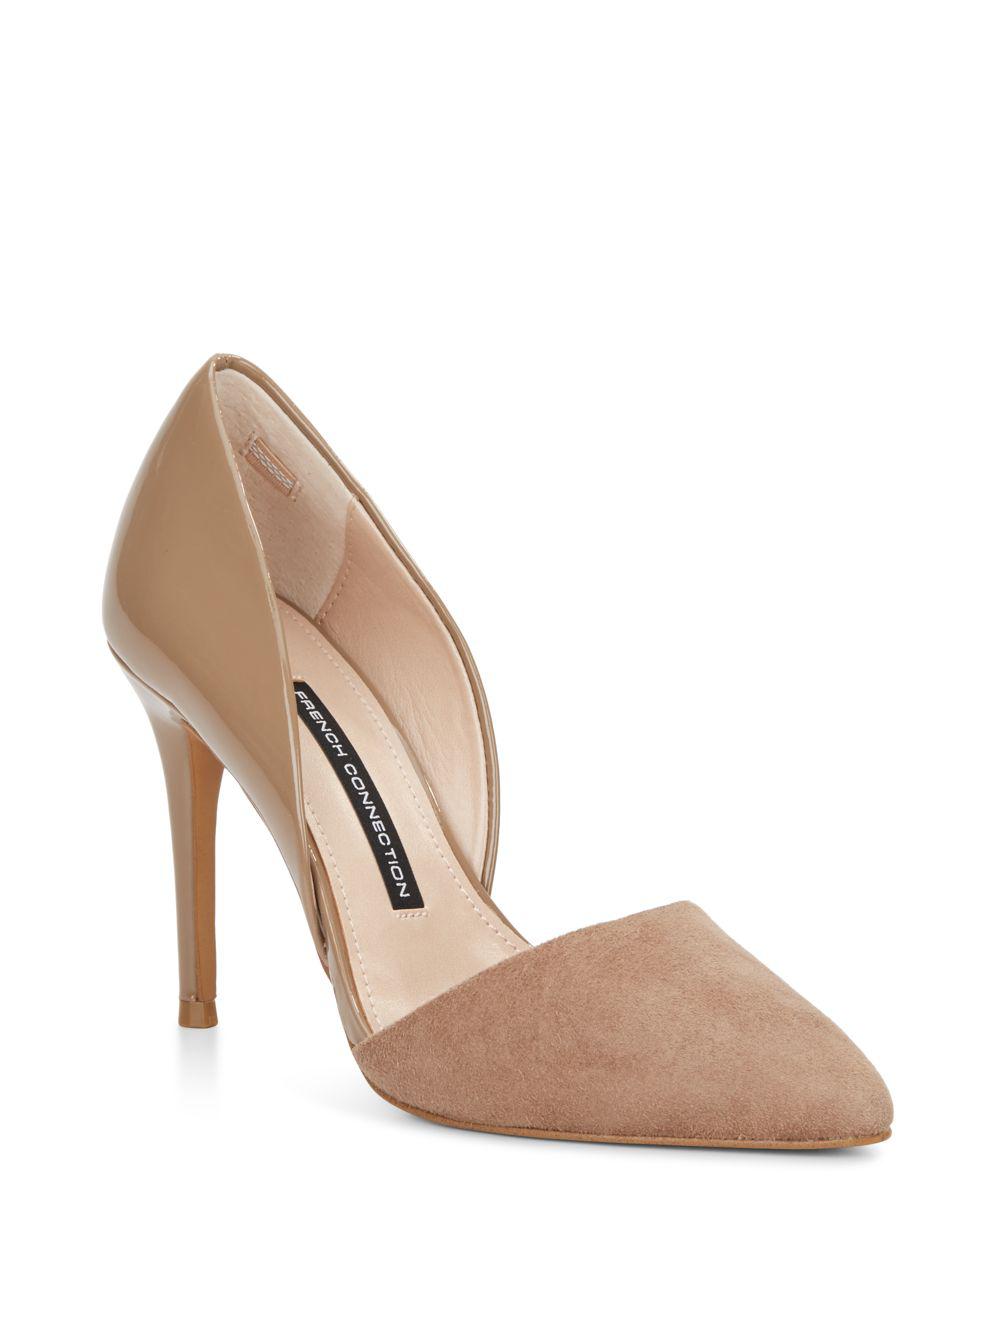 French Connection Elvia Leather & Suede D'orsay Pumps in Natural | Lyst